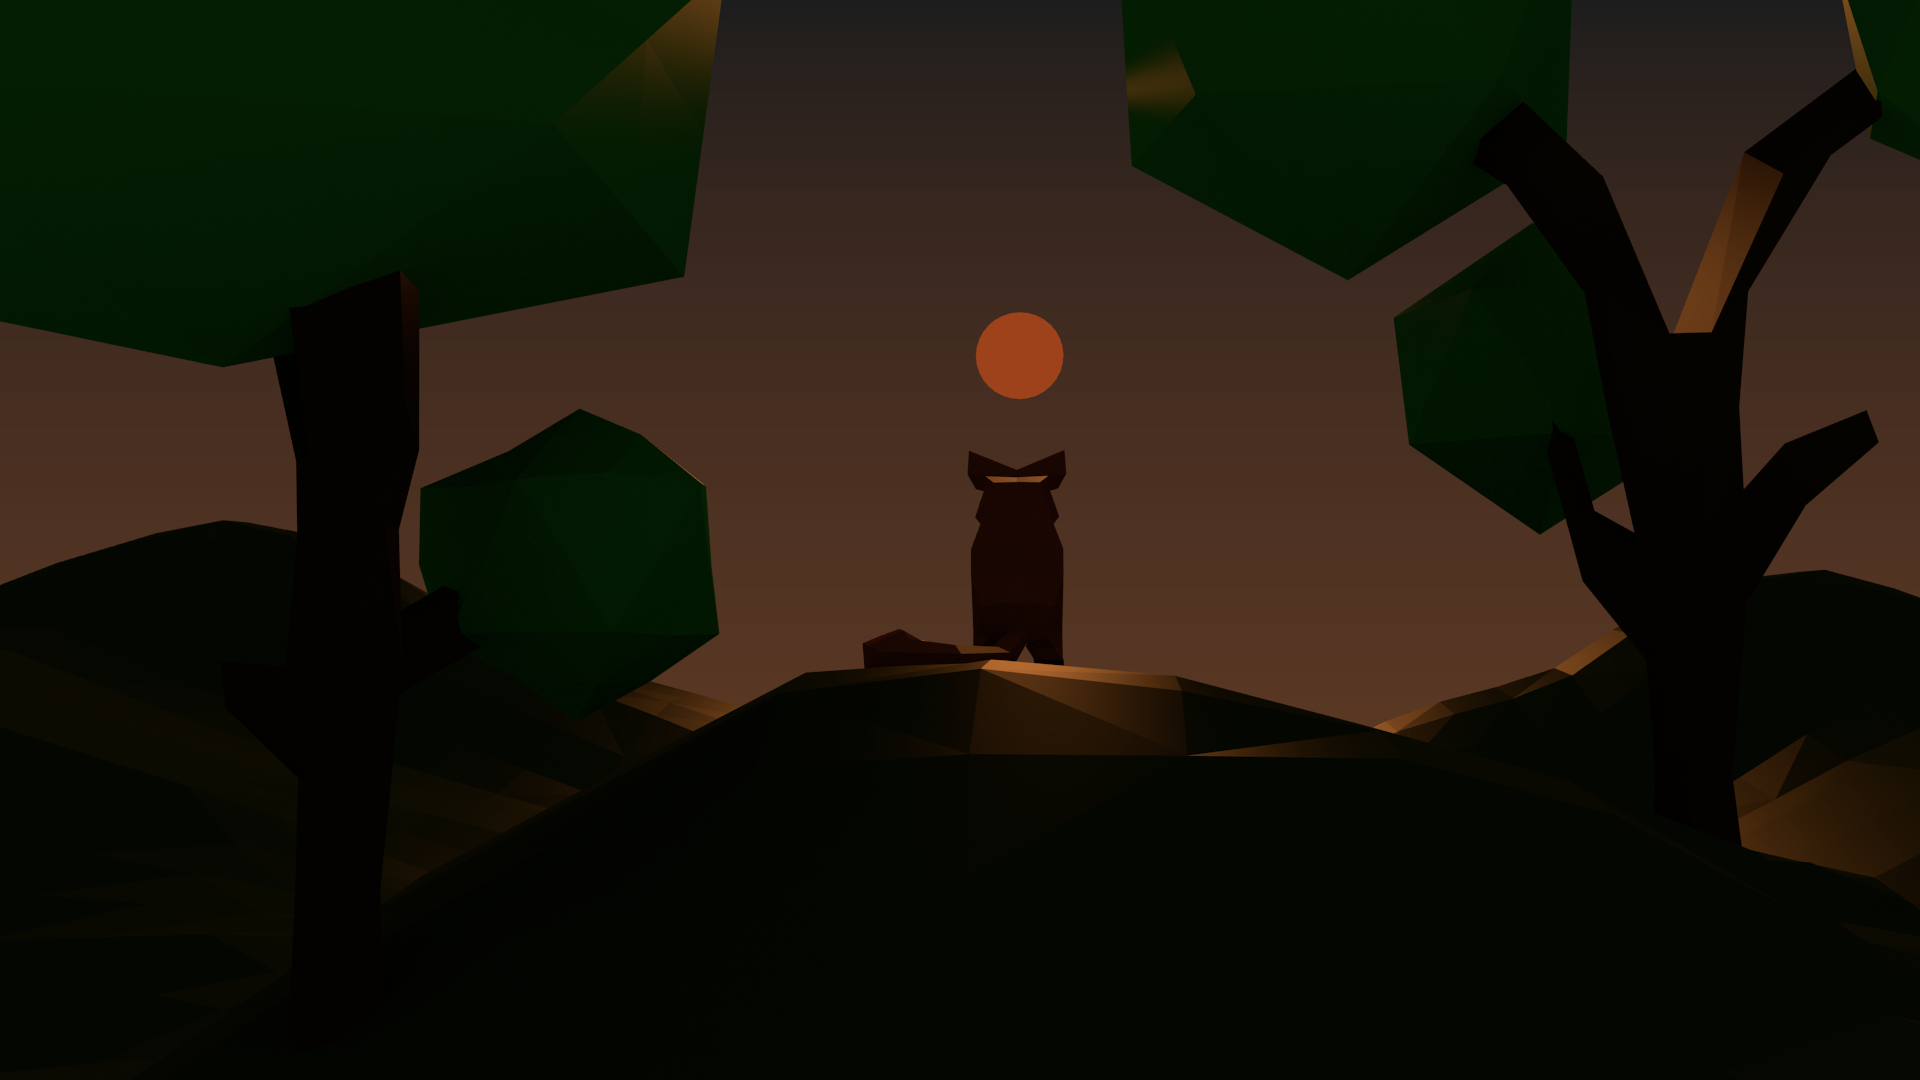 Wallpaper Fox Sunset Nature Alone Low Poly 3d